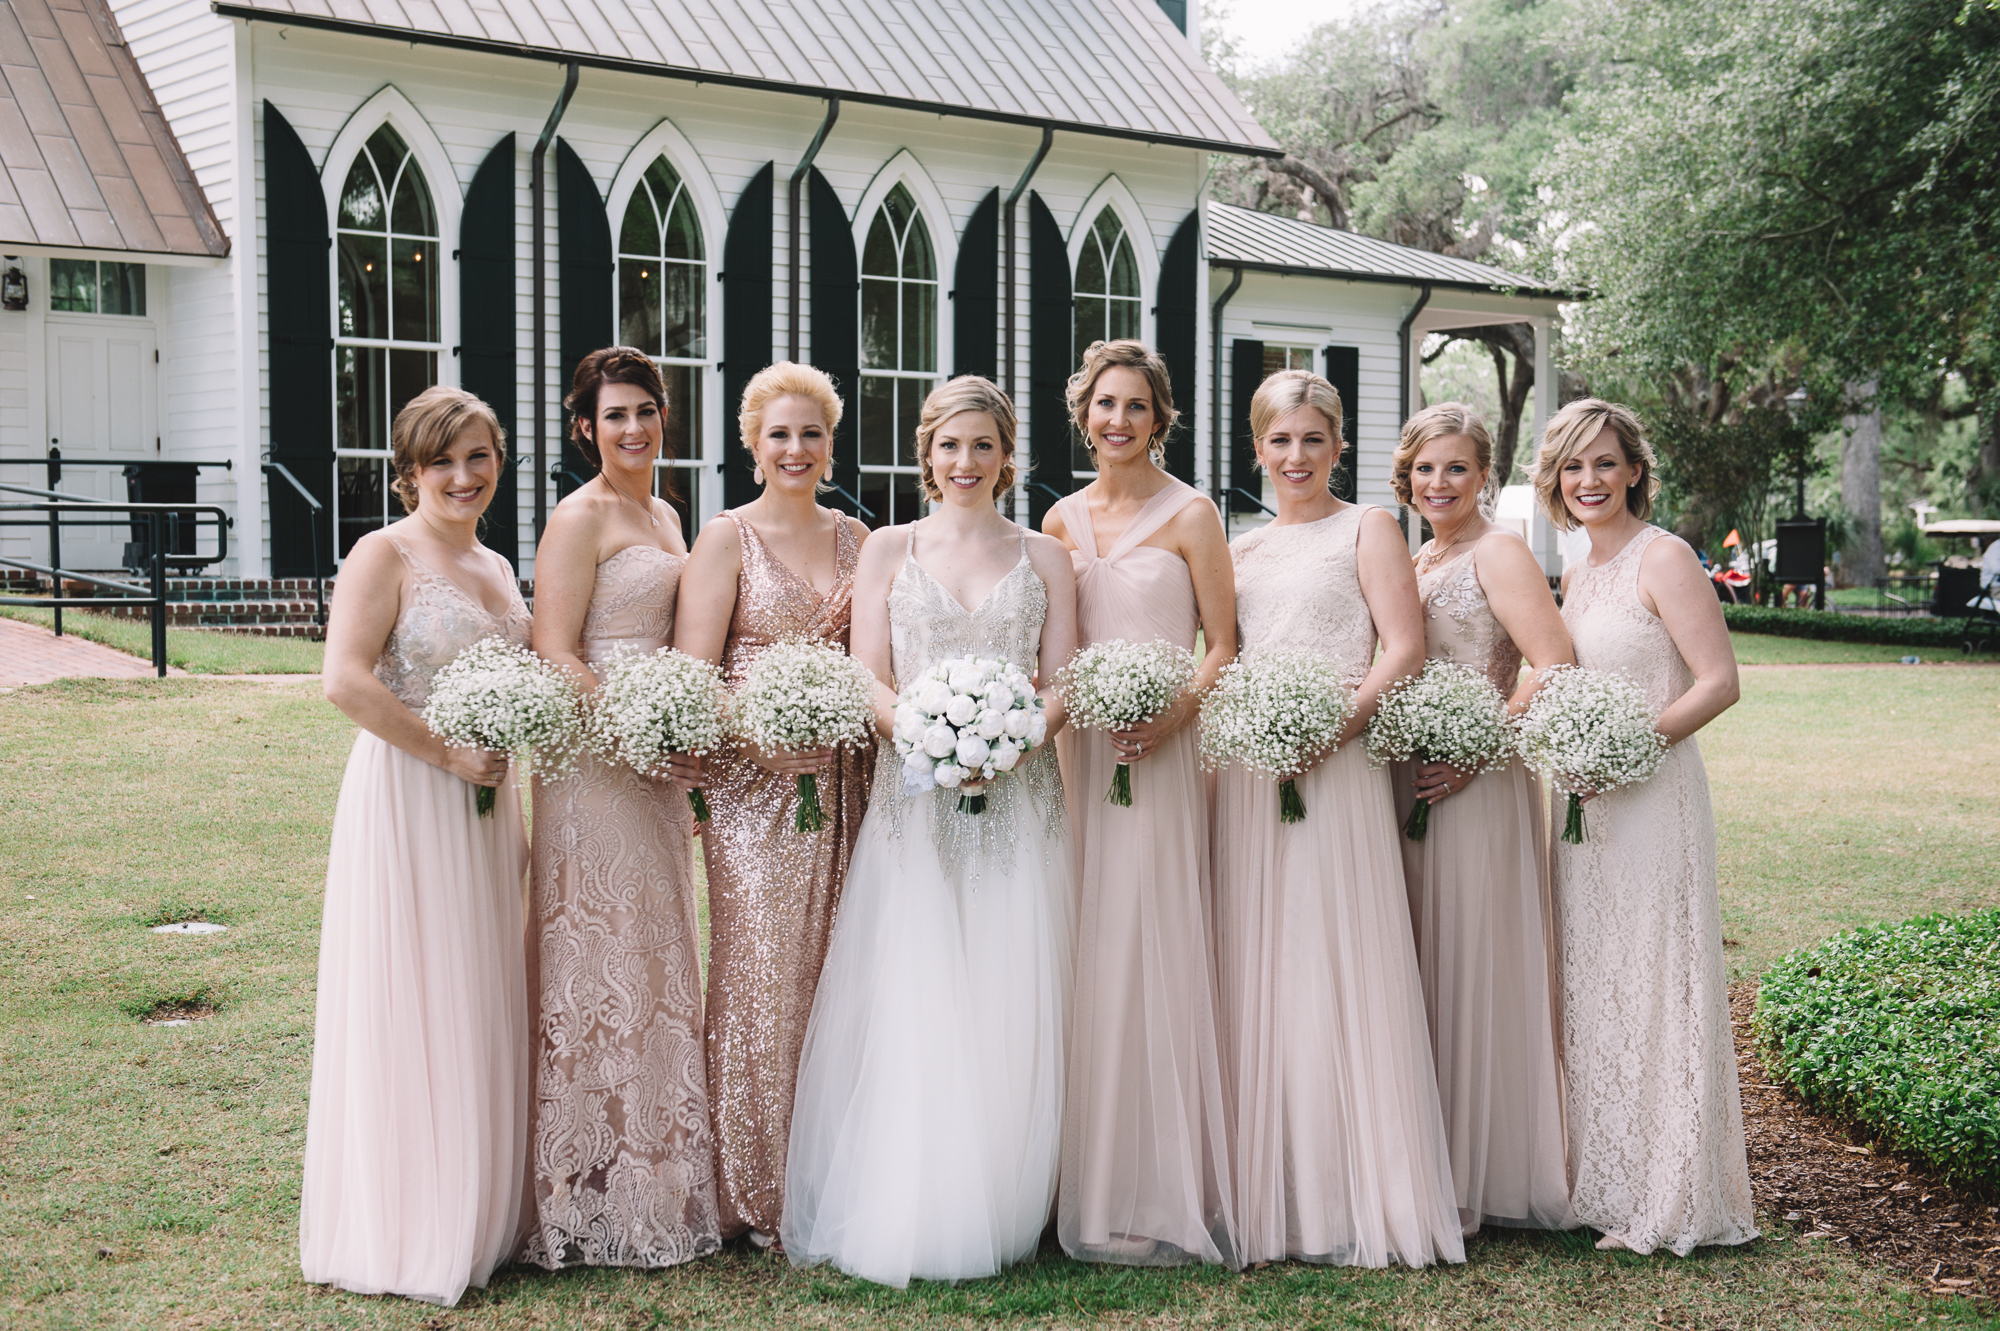 Bridesmaids in Mismatched Champagne Dresses